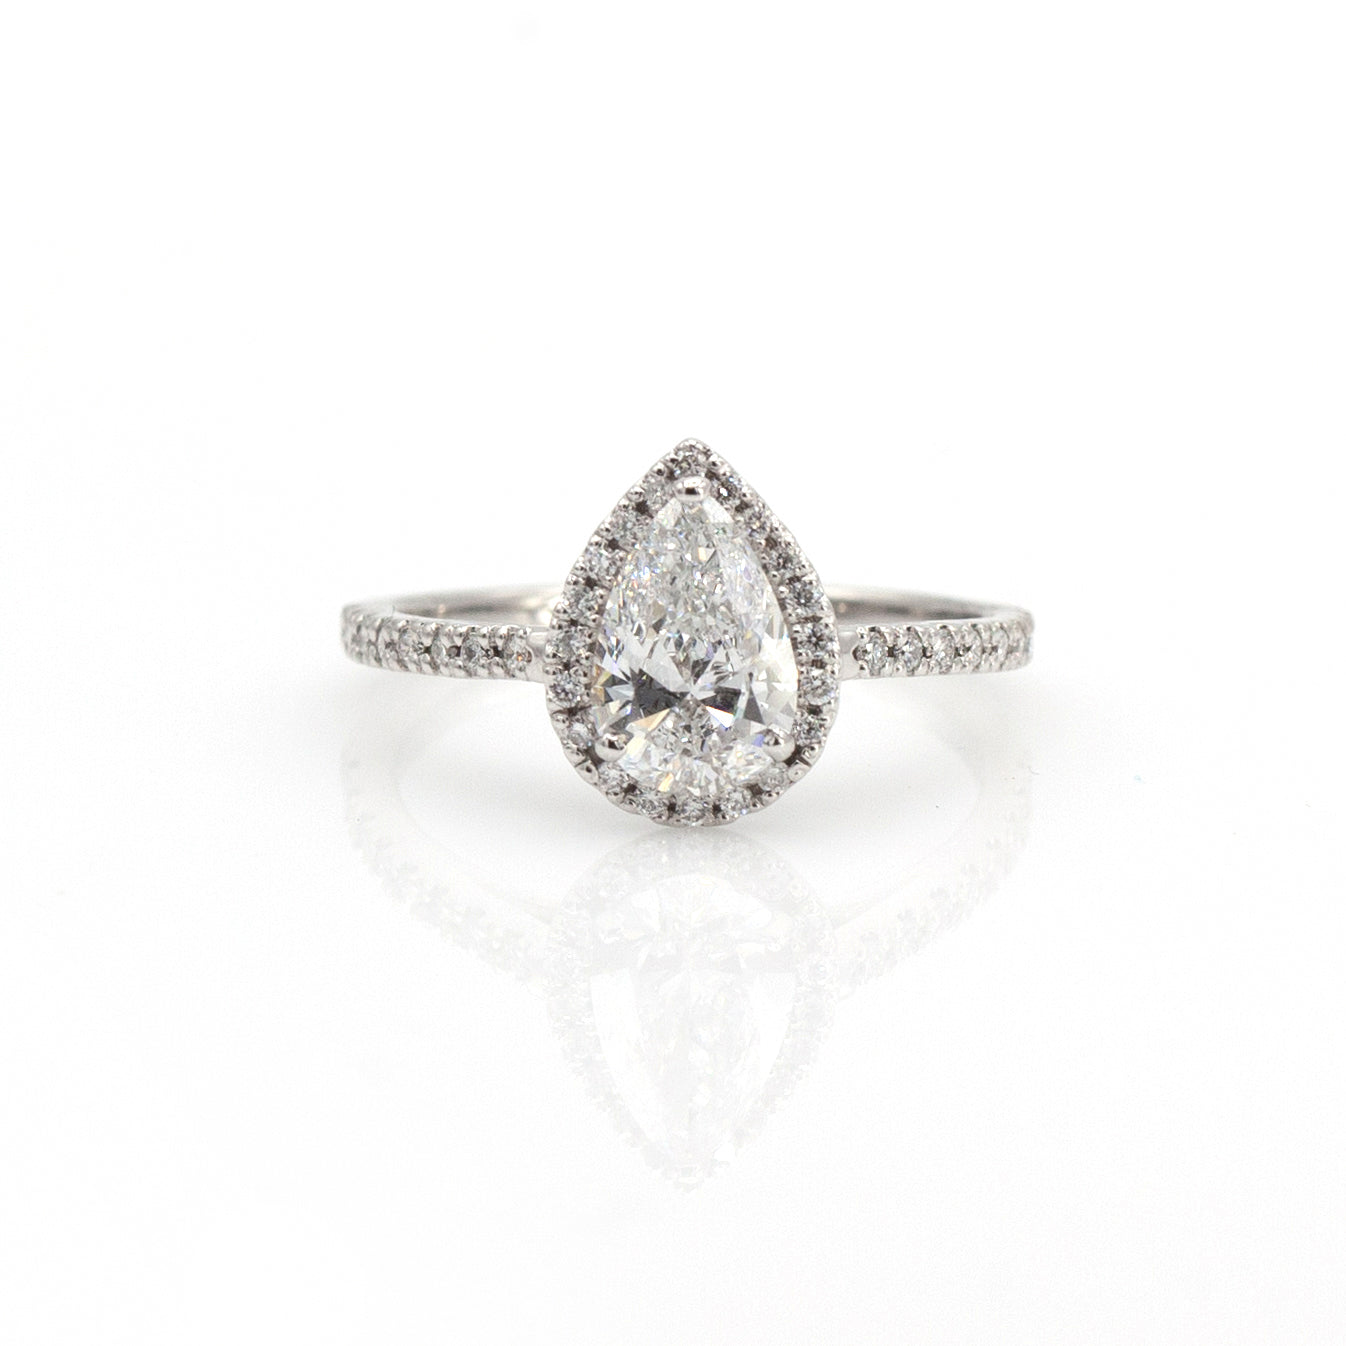 14K 1.07ct Lab-created Pear-shaped Diamond Engagement Ring